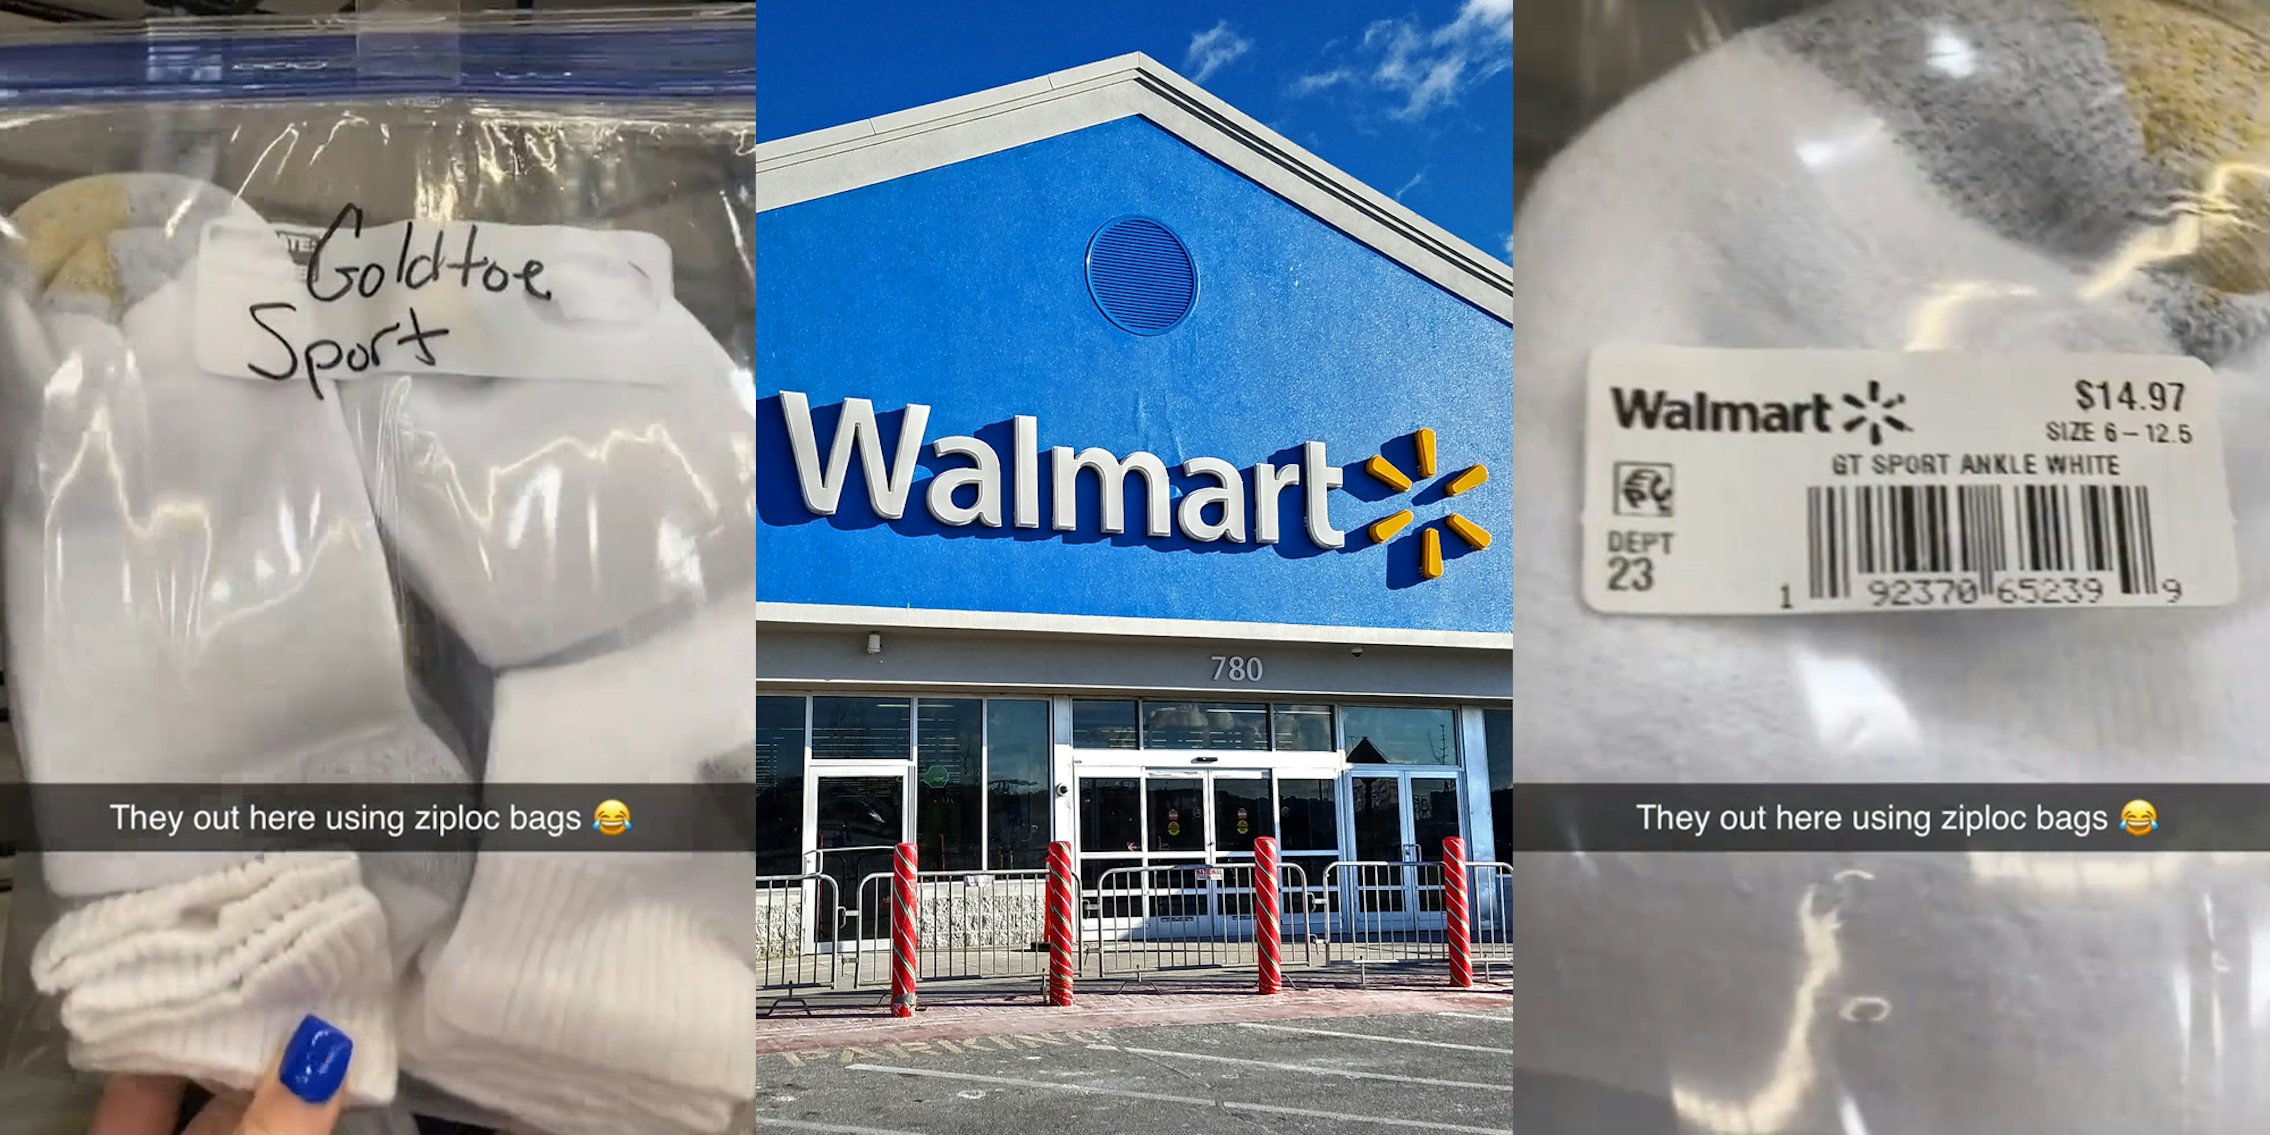 Walmart socks in ziploc bag hung on rack qith caption 'They out here using ziploc bags' (l) Walmart building entrance with sign (c) Walmart socks in ziploc bag hung on rack qith caption 'They out here using ziploc bags' (r)